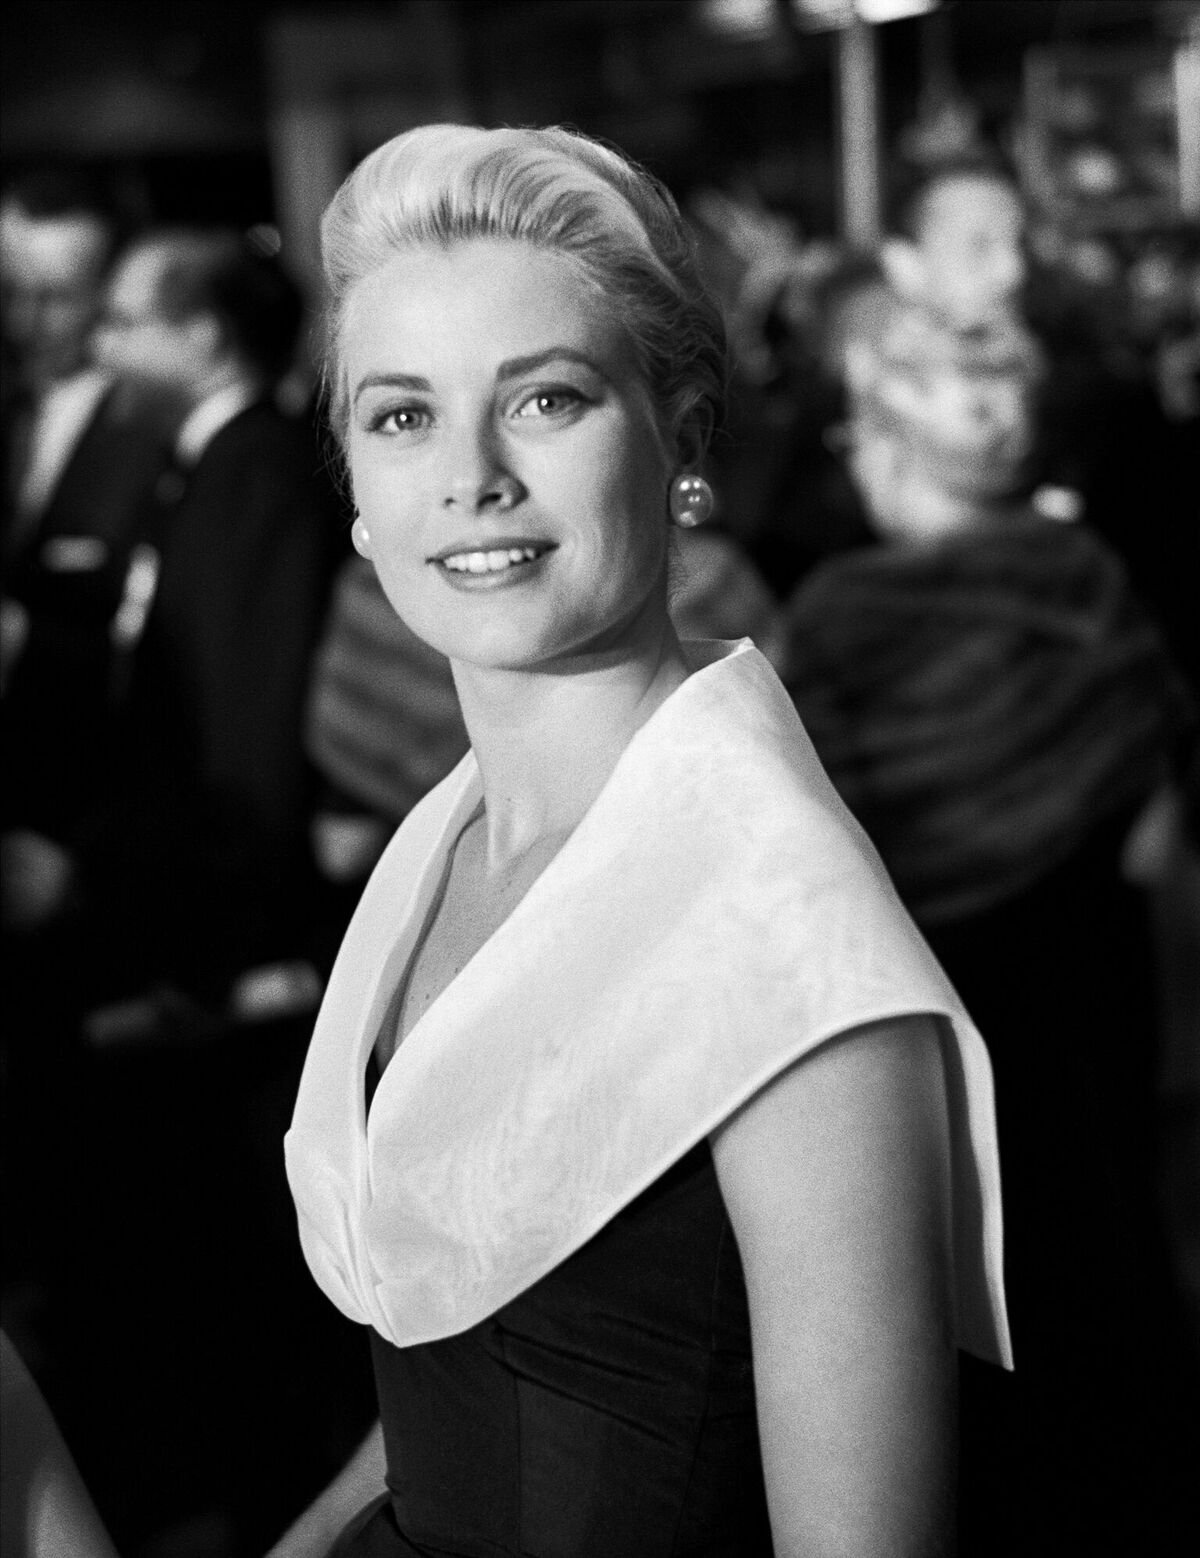 Actress Grace Kelly attends the premiere of the movie "Rear Window" which was released on August 1, 1954 | Photo: Getty Images